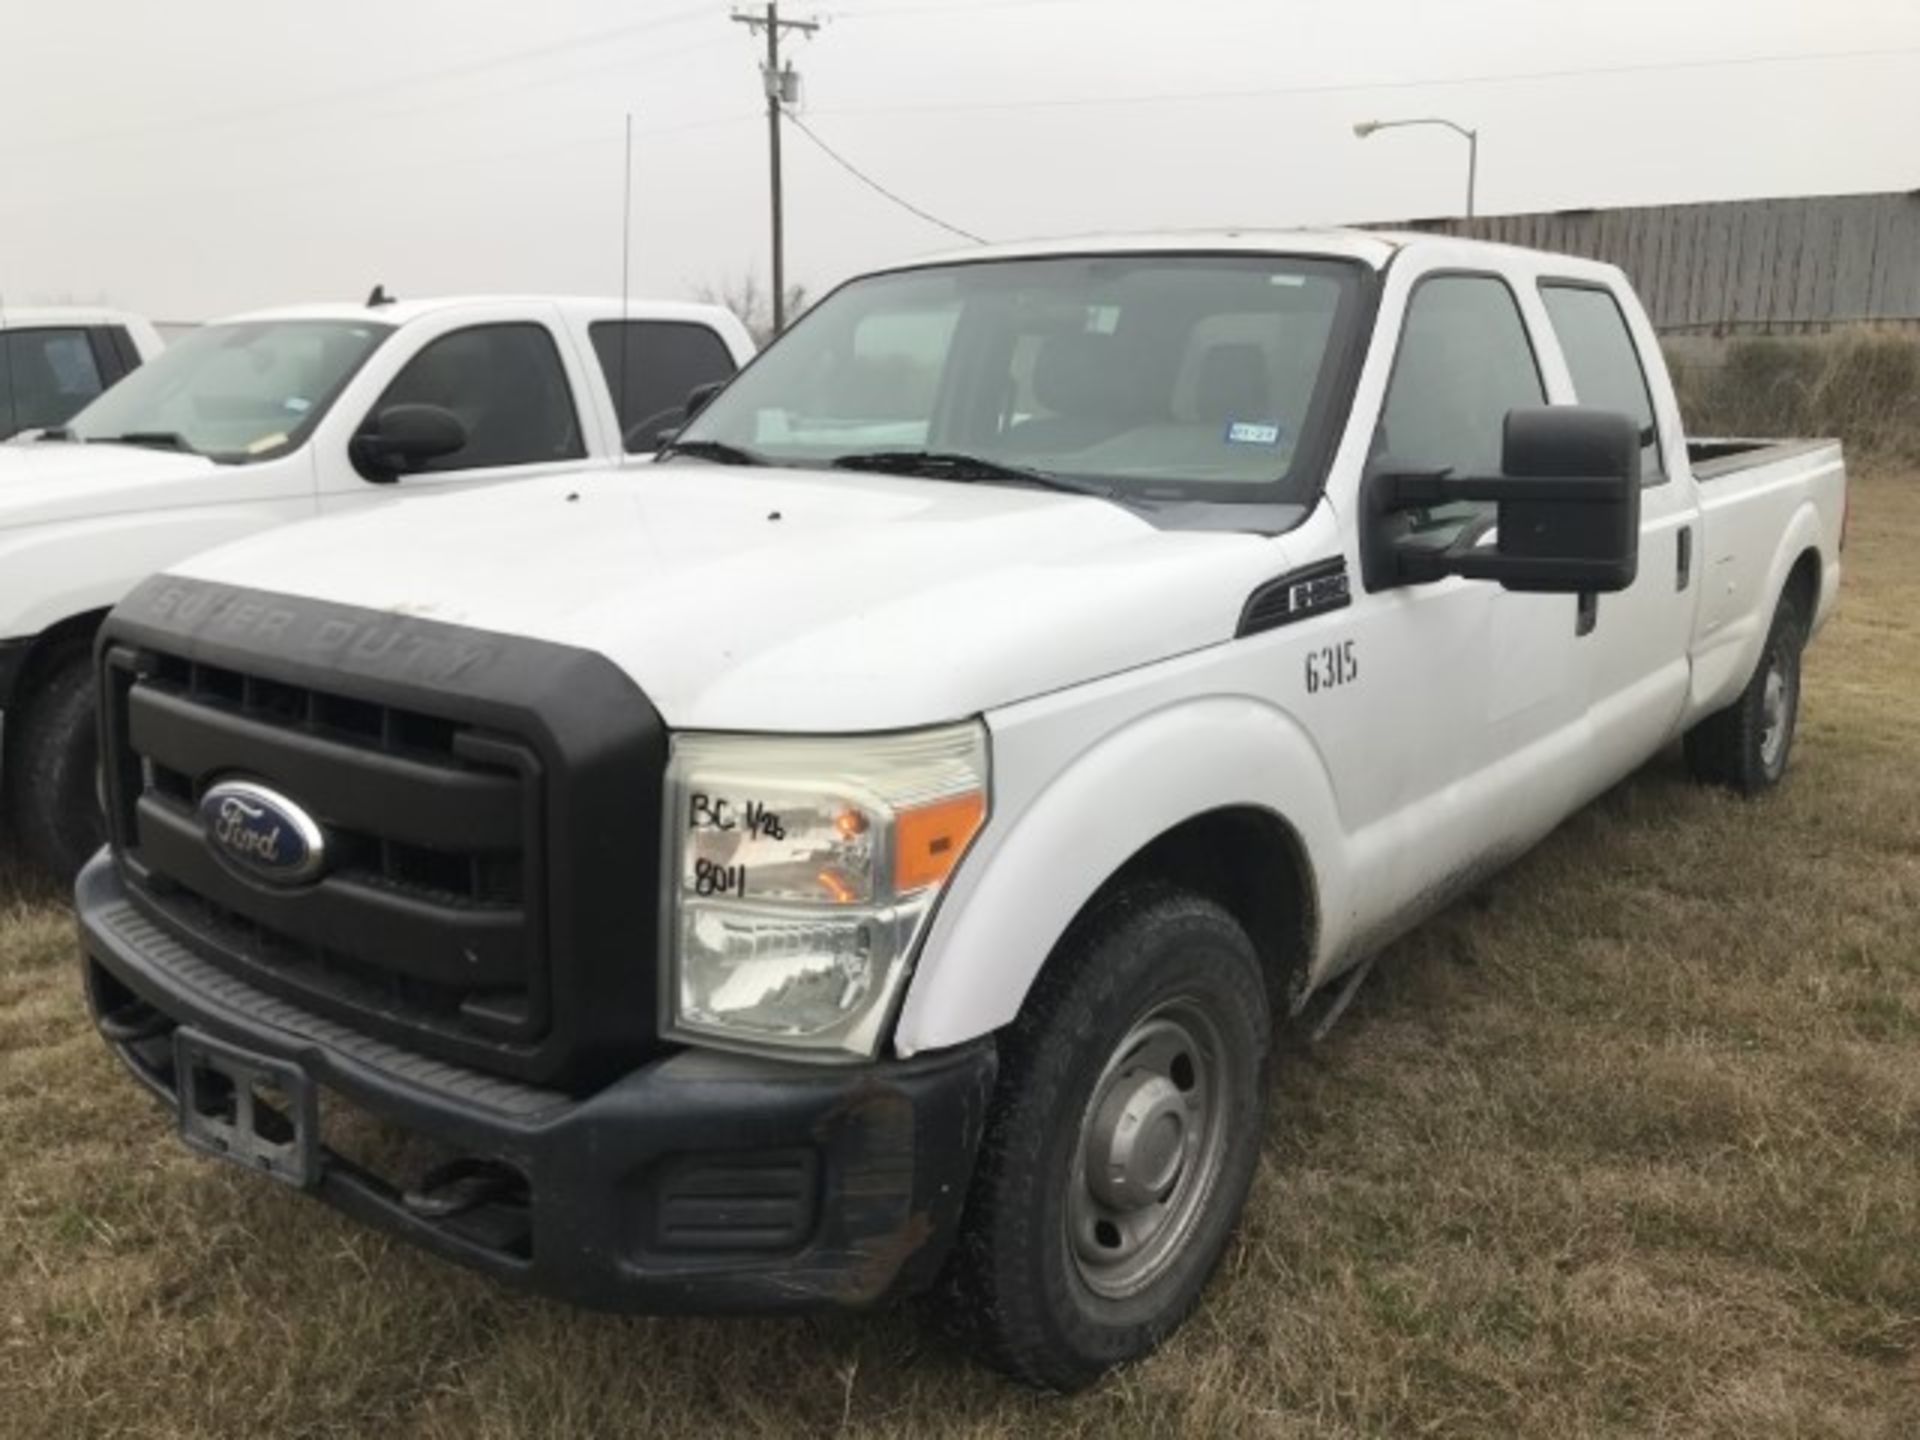 2011 Ford F-250 Xl VIN: 1FT7W2A61BEC11600 Odometer States: 145,500 Color: W